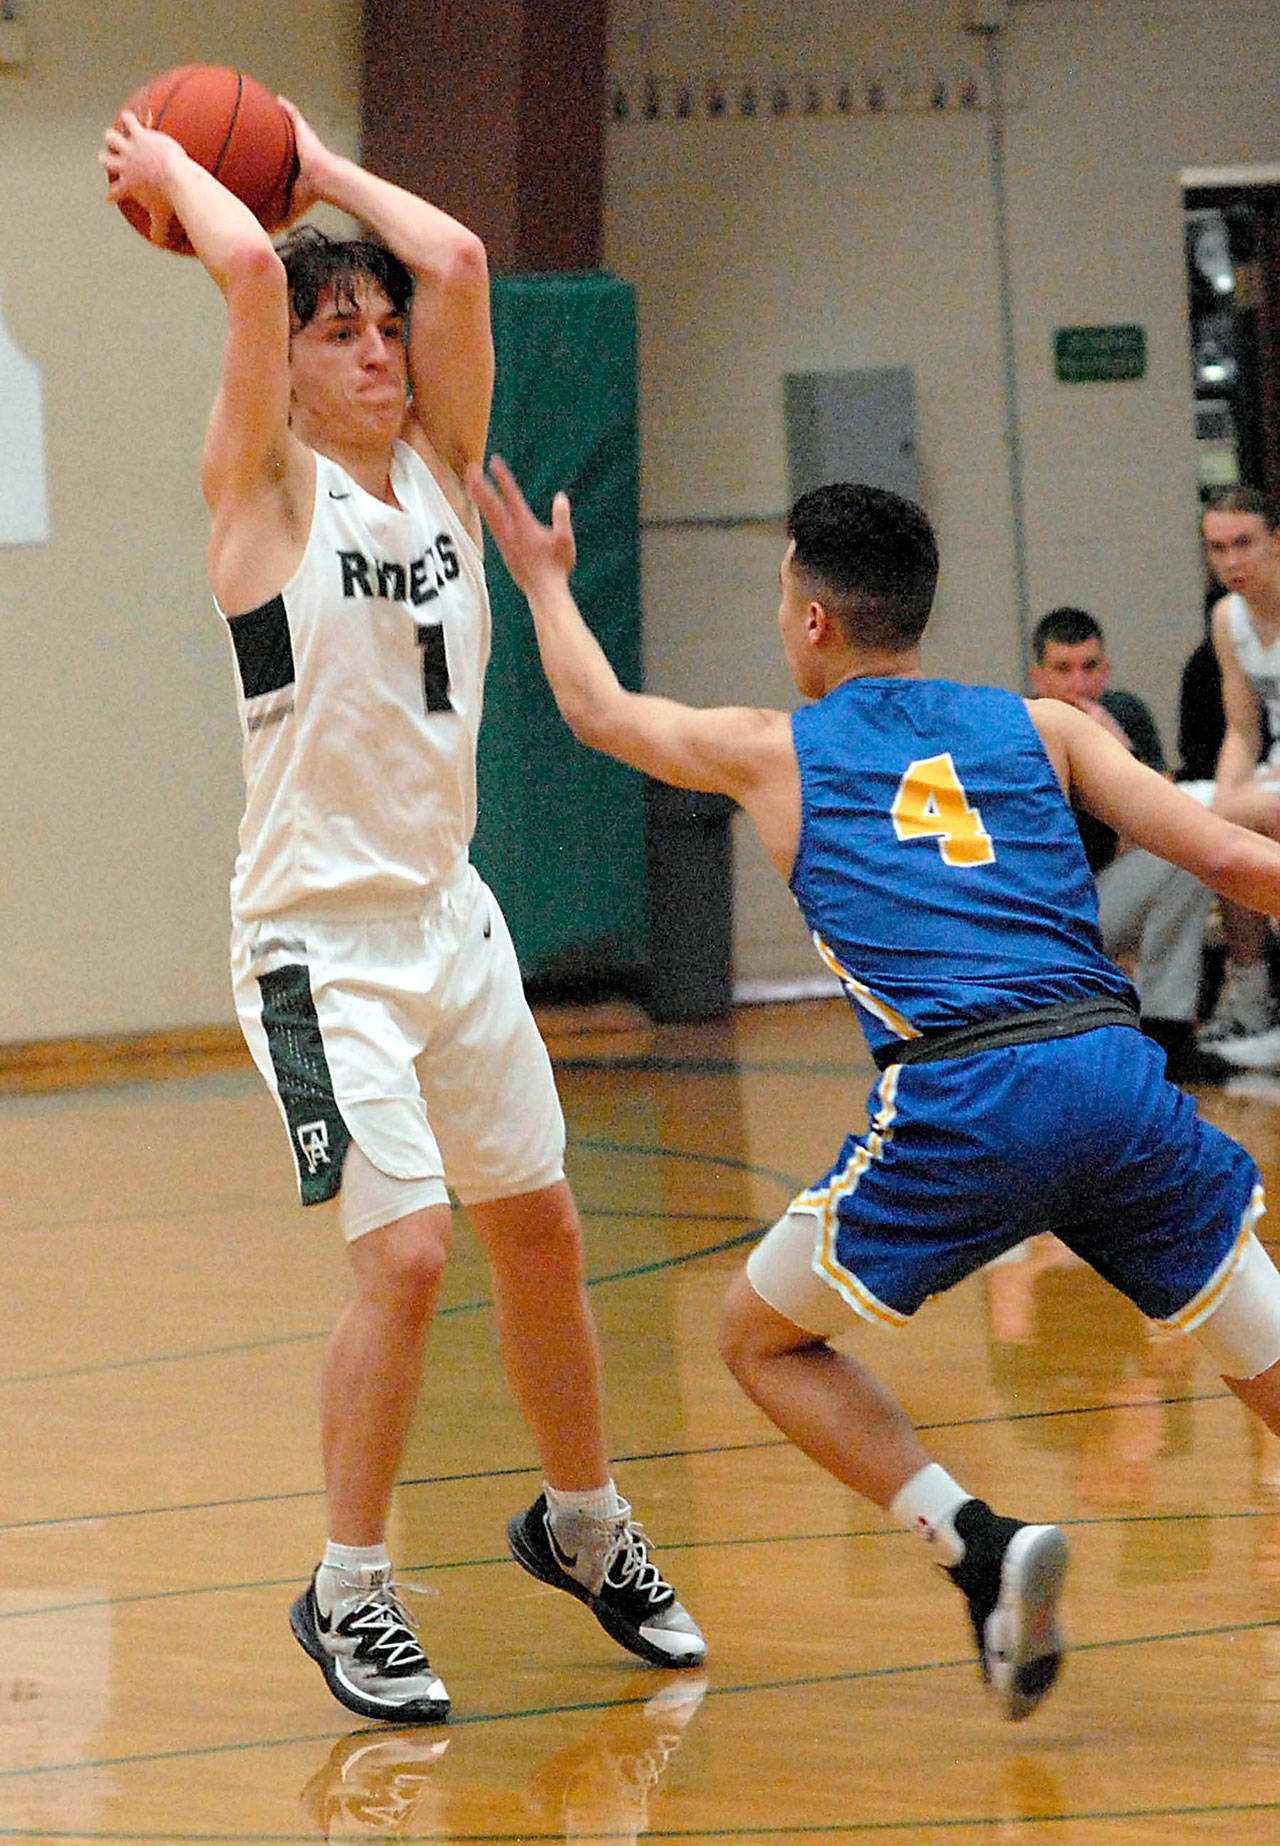 Port Angeles’ Gary Johnson, left, shown in a February game against Bremerton, is the All-Peninsula Boys Basketball MVP as selected by area coaches and the sports staff of the Peninsula Daily News. (Keith Thorpe/Peninsula Daily News)